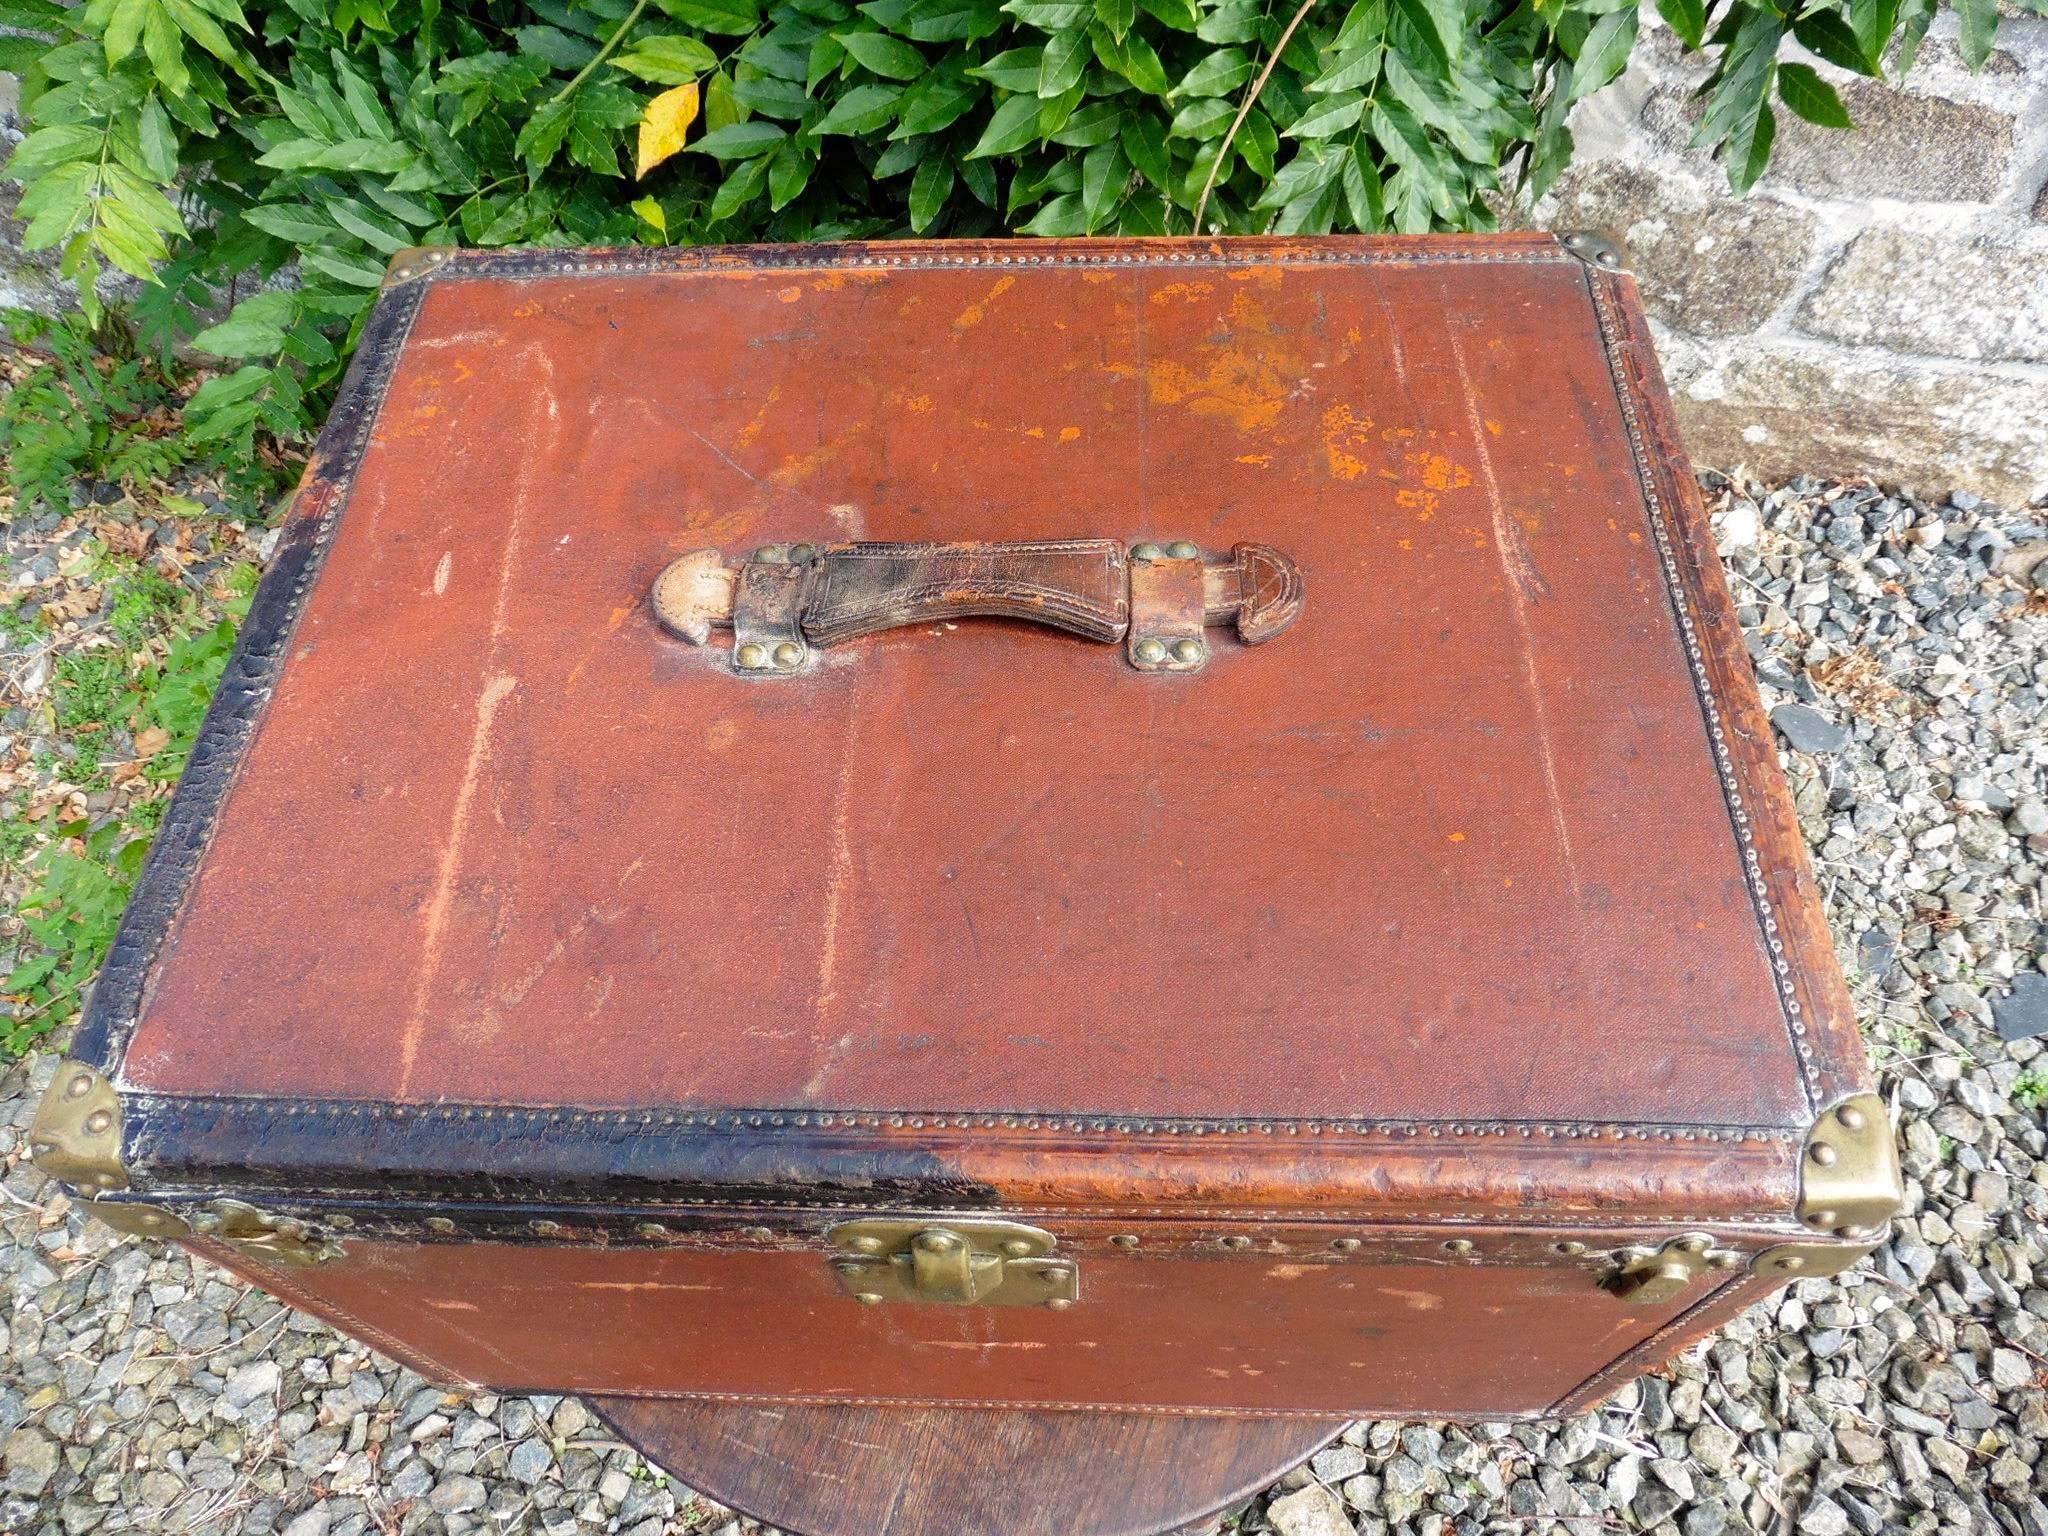 Two original Louis Vuitton, steamer trunk and case

These 2 very rare suitcases date from the very early 20th century

The steamer trunk is made in original Vuittonite, leather and brass, the condition is used, there is a piece of one of the